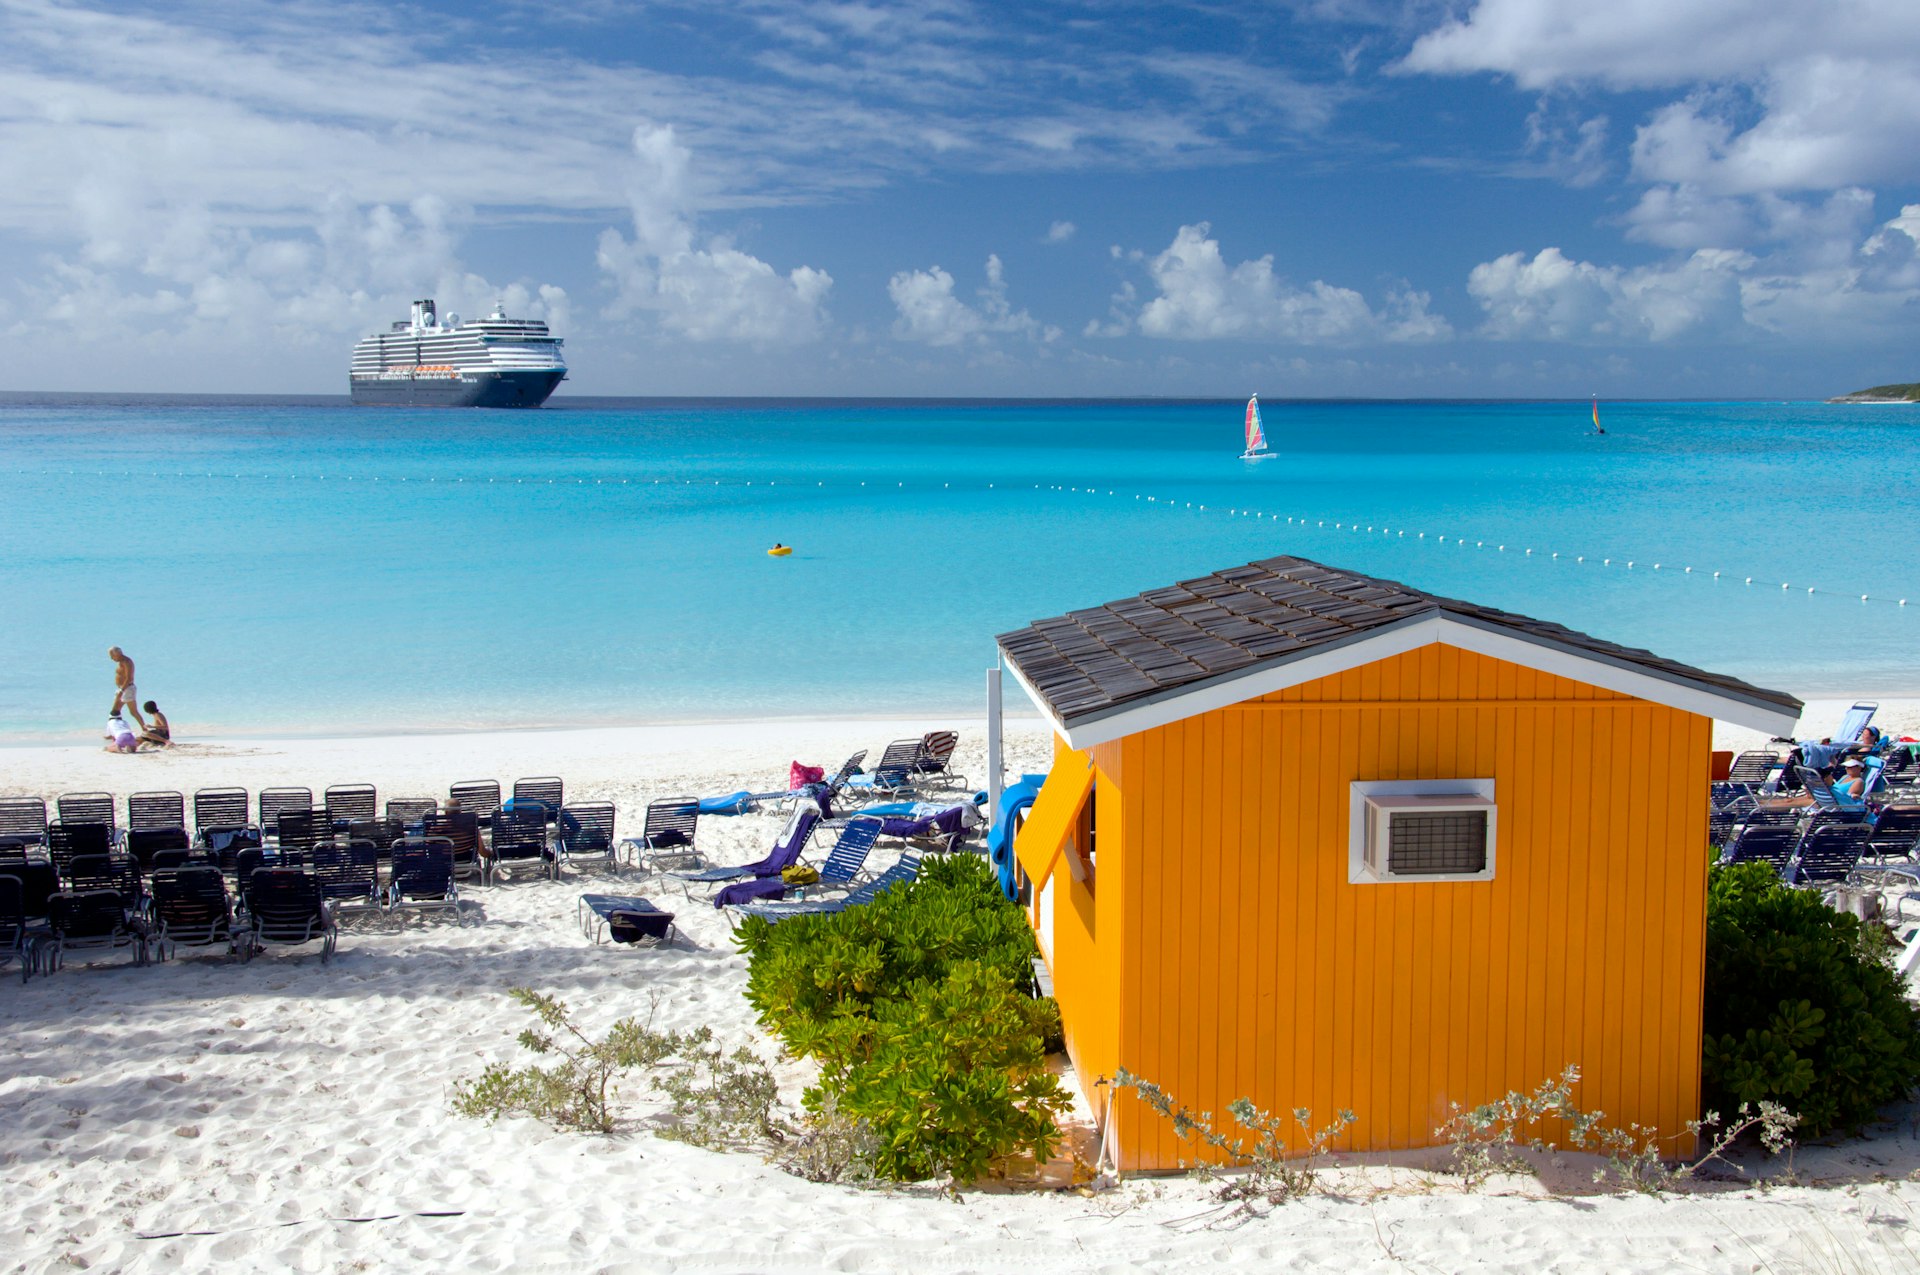 A colorful beach cabana with the Holland American cruise ship at sea in the background